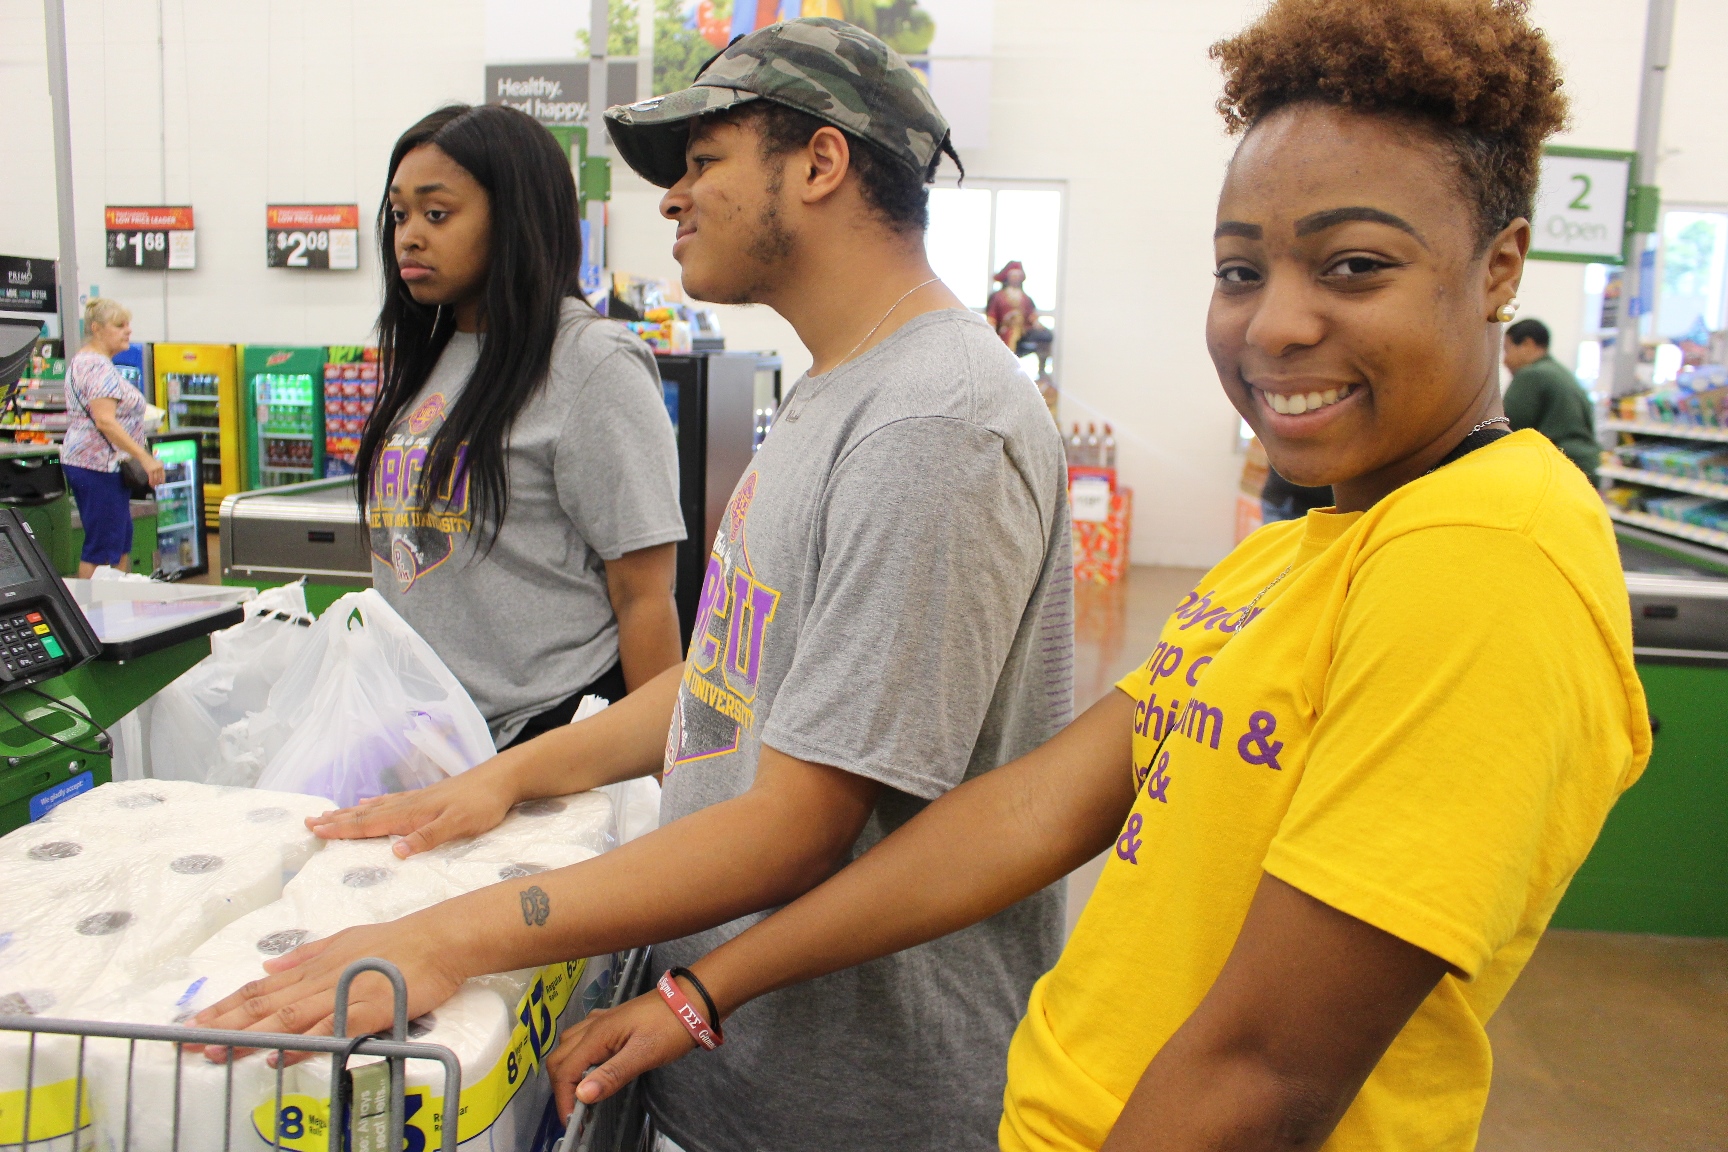 Student Leaders Shopping For The Women And Children’s Shelter2